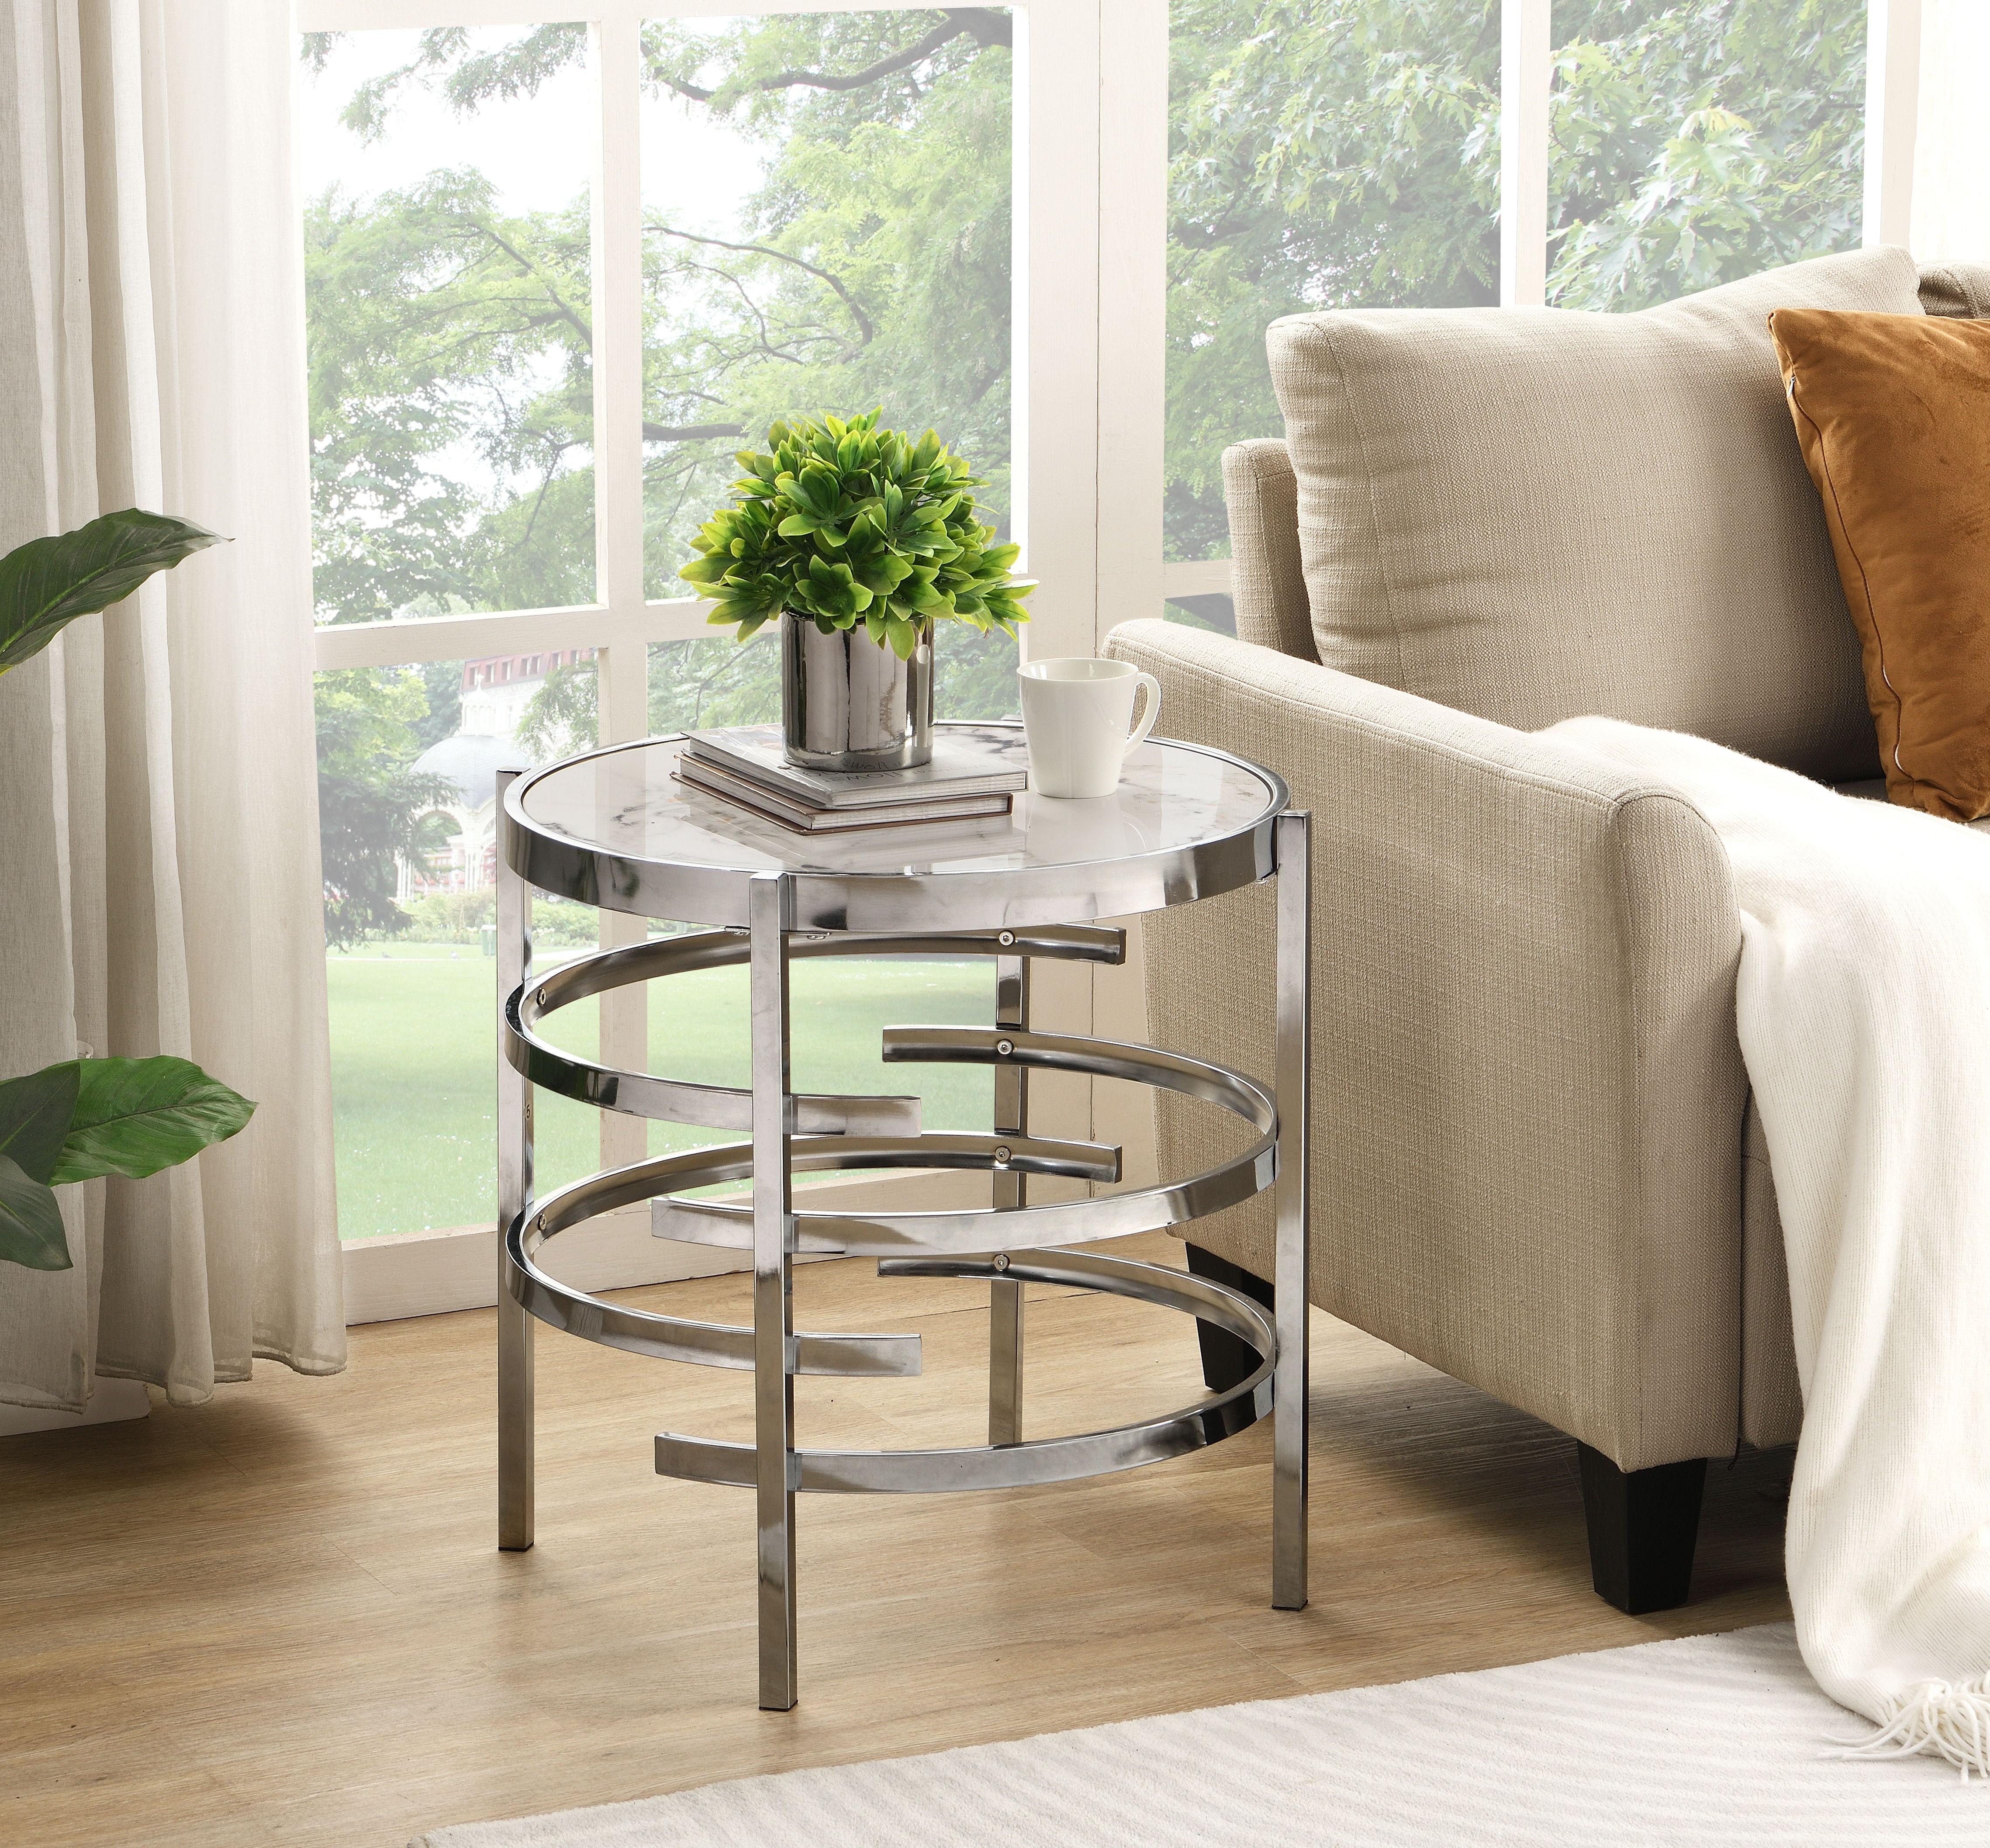 Modern Round End Table With Sintered Stone Top, Chrome/ Silver End Table For Living Room